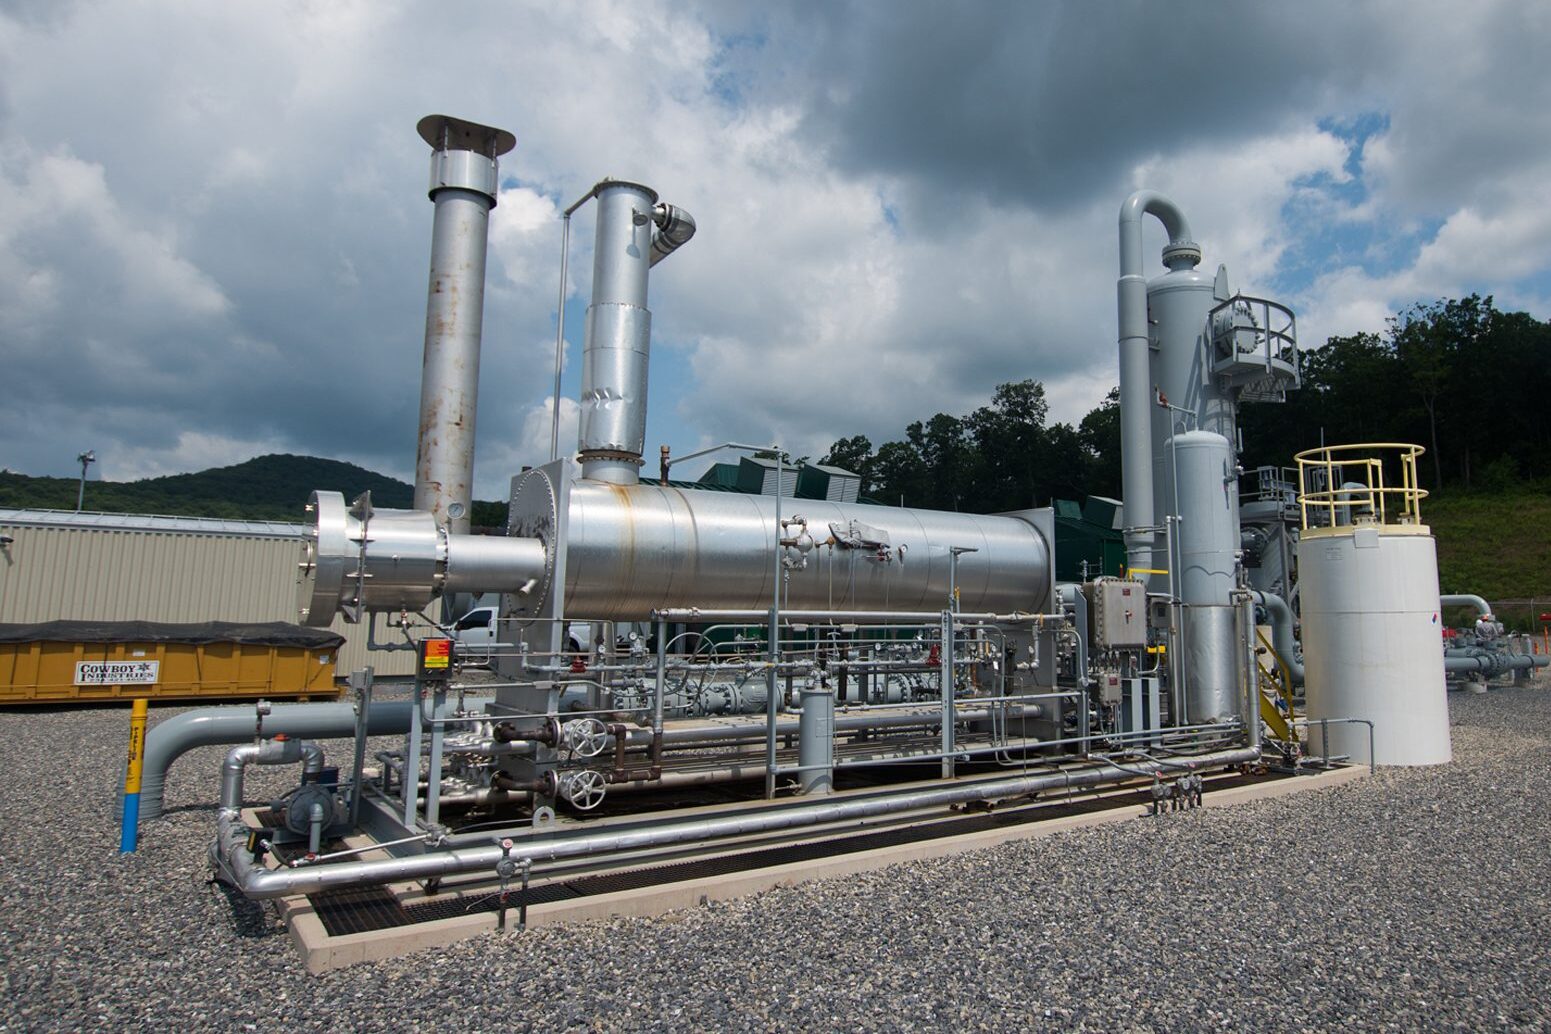 A shiny silver gas processing unit against a blue sky with white clouds.